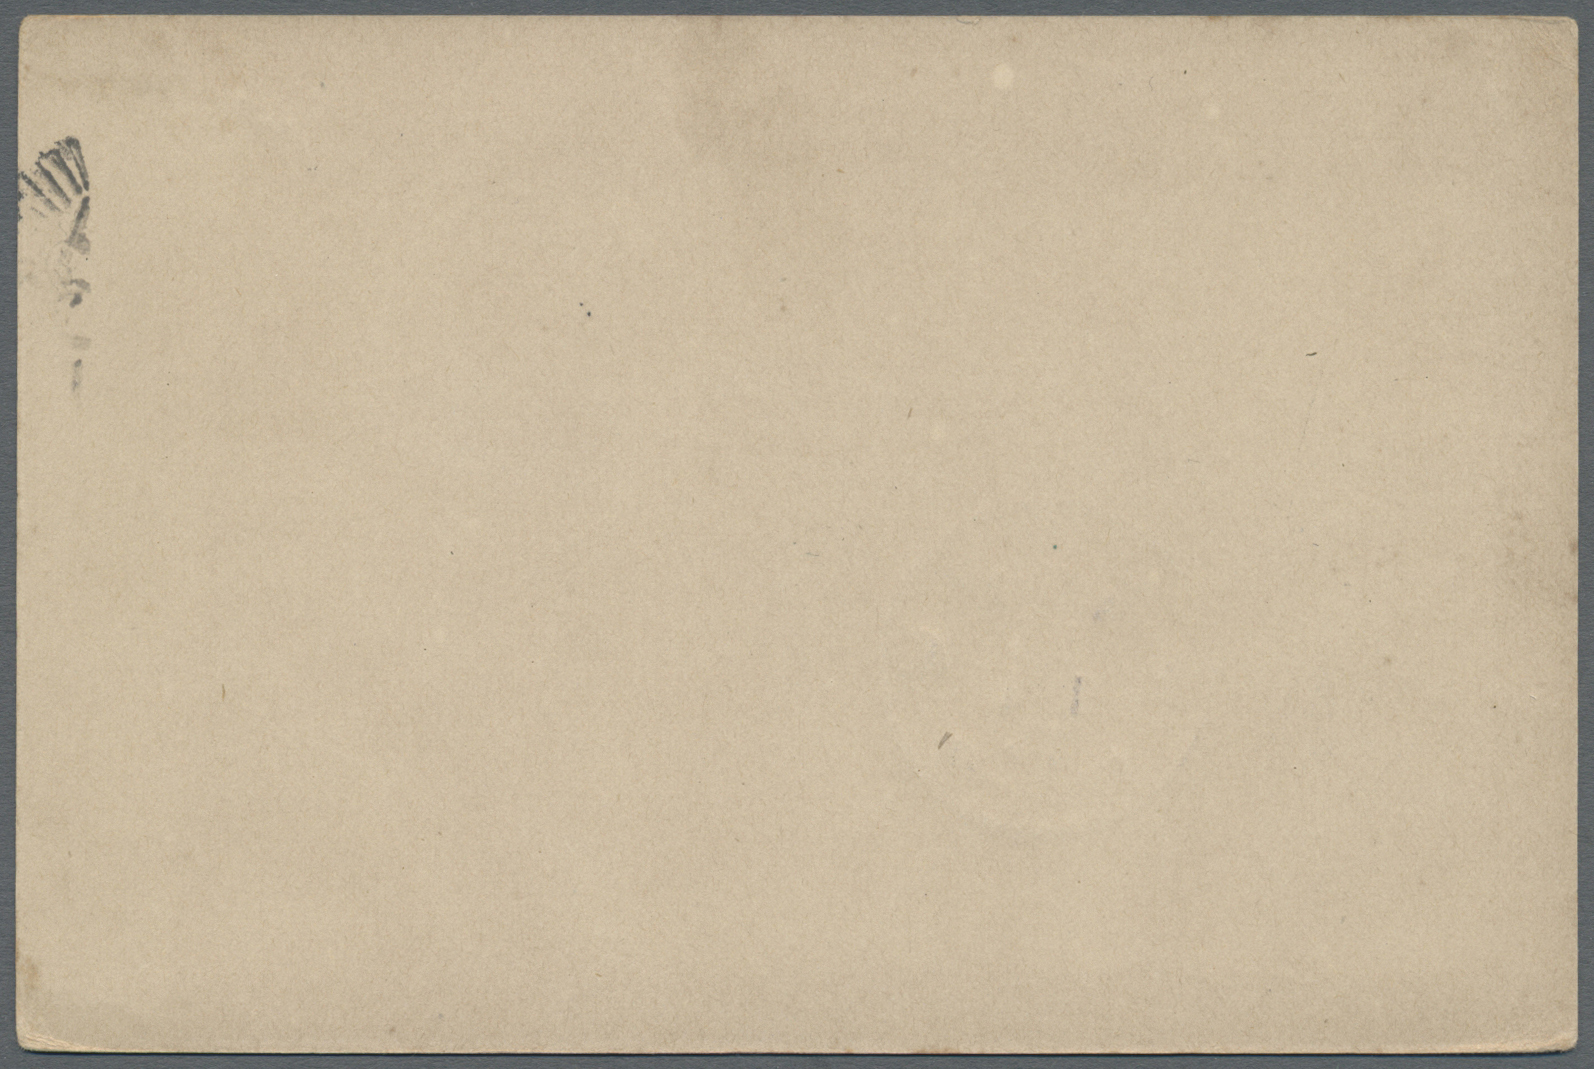 GA Queensland - Ganzsachen: 1893/1895, 4 postal stationery cards, used to Germany, etc.